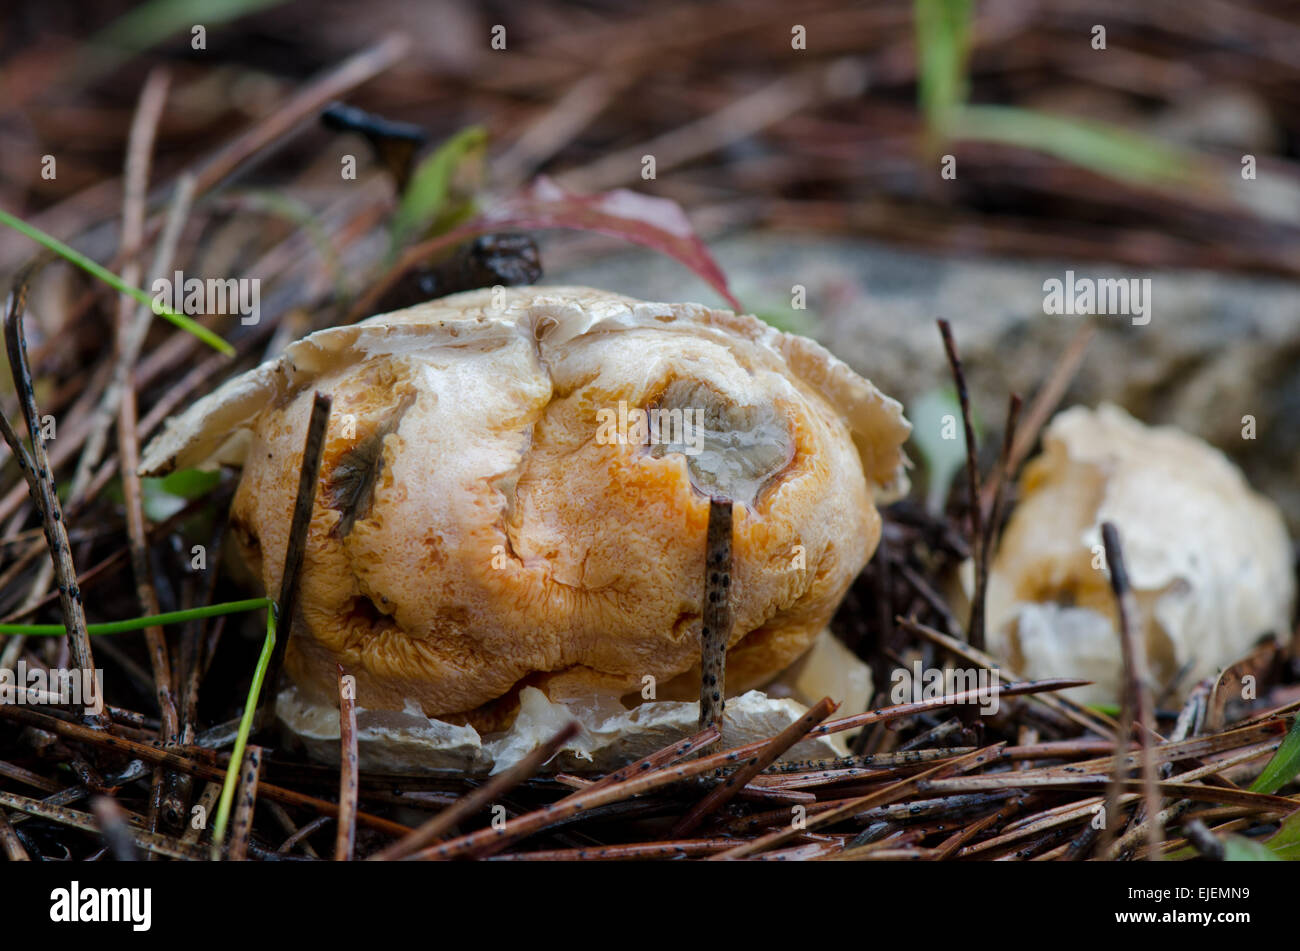 Egg of Clathrus ruber, latticed stinkhorn, basket stinkhorn, red cage, Fungus, before erruption, Andalusia, Spain. Stock Photo